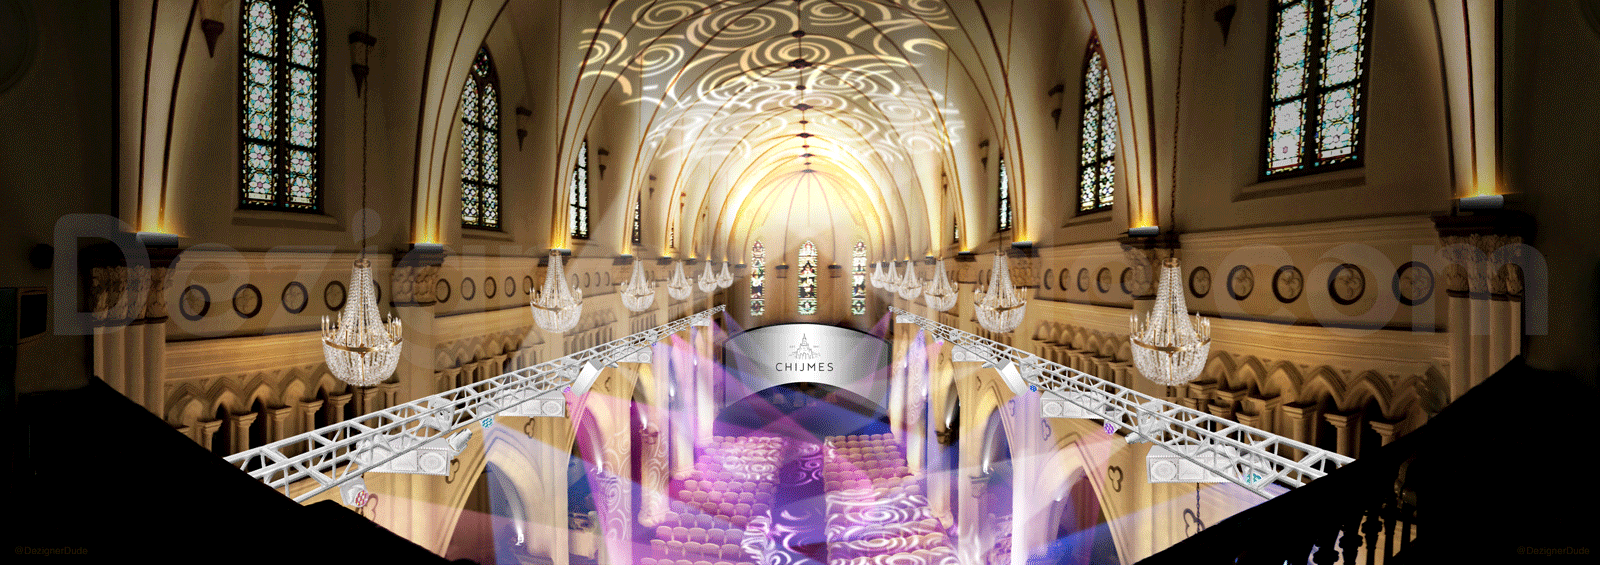 Chijmes Night Event Lighting Effects